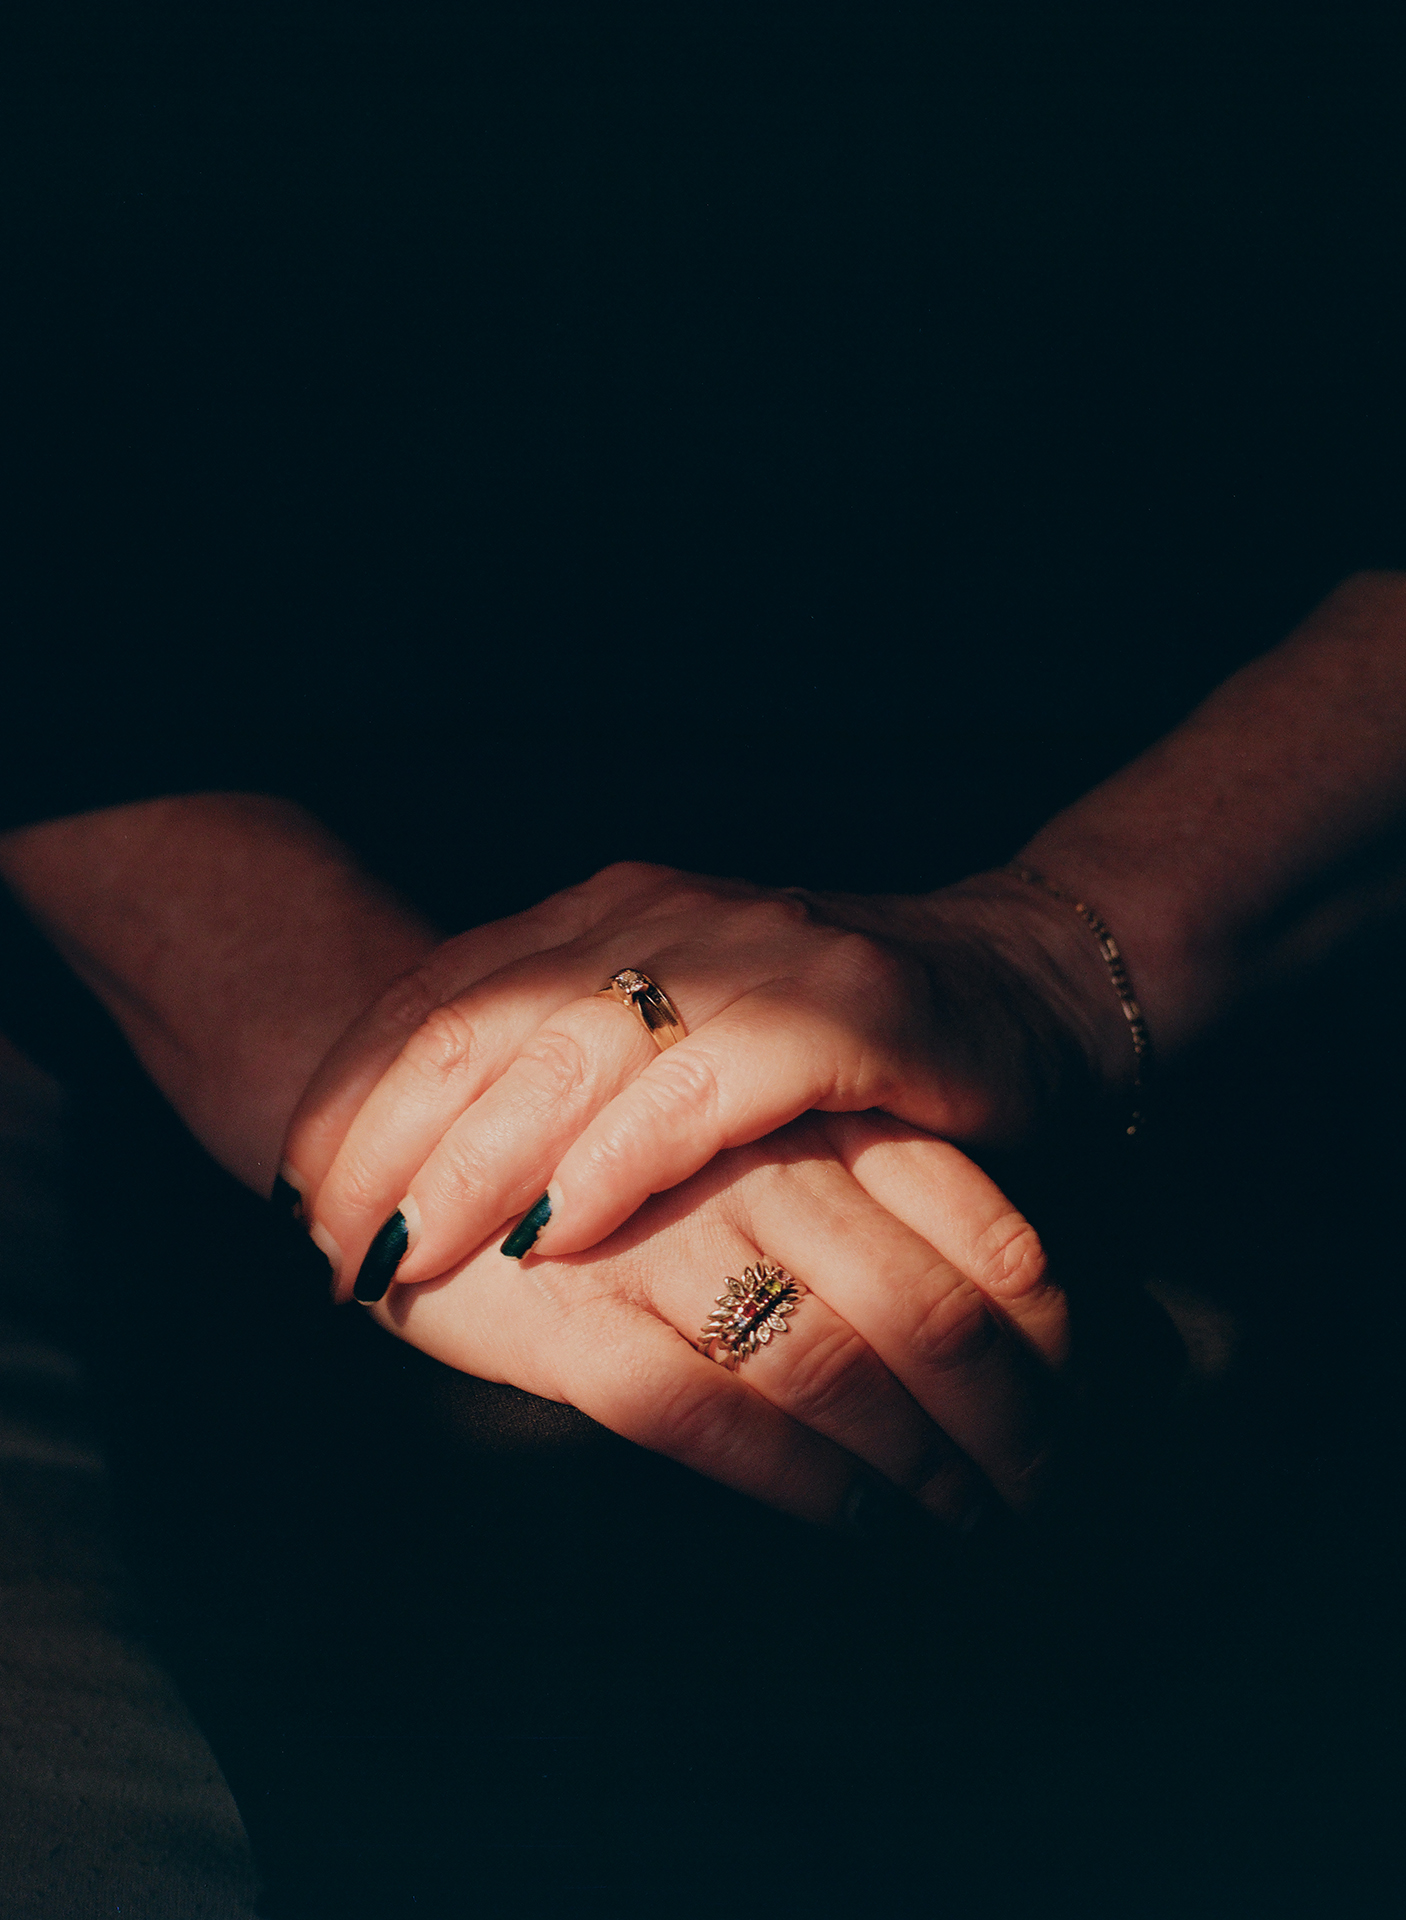 A mother's hands crossed over one another on her lap, the lighting showcasing her wedding bands.